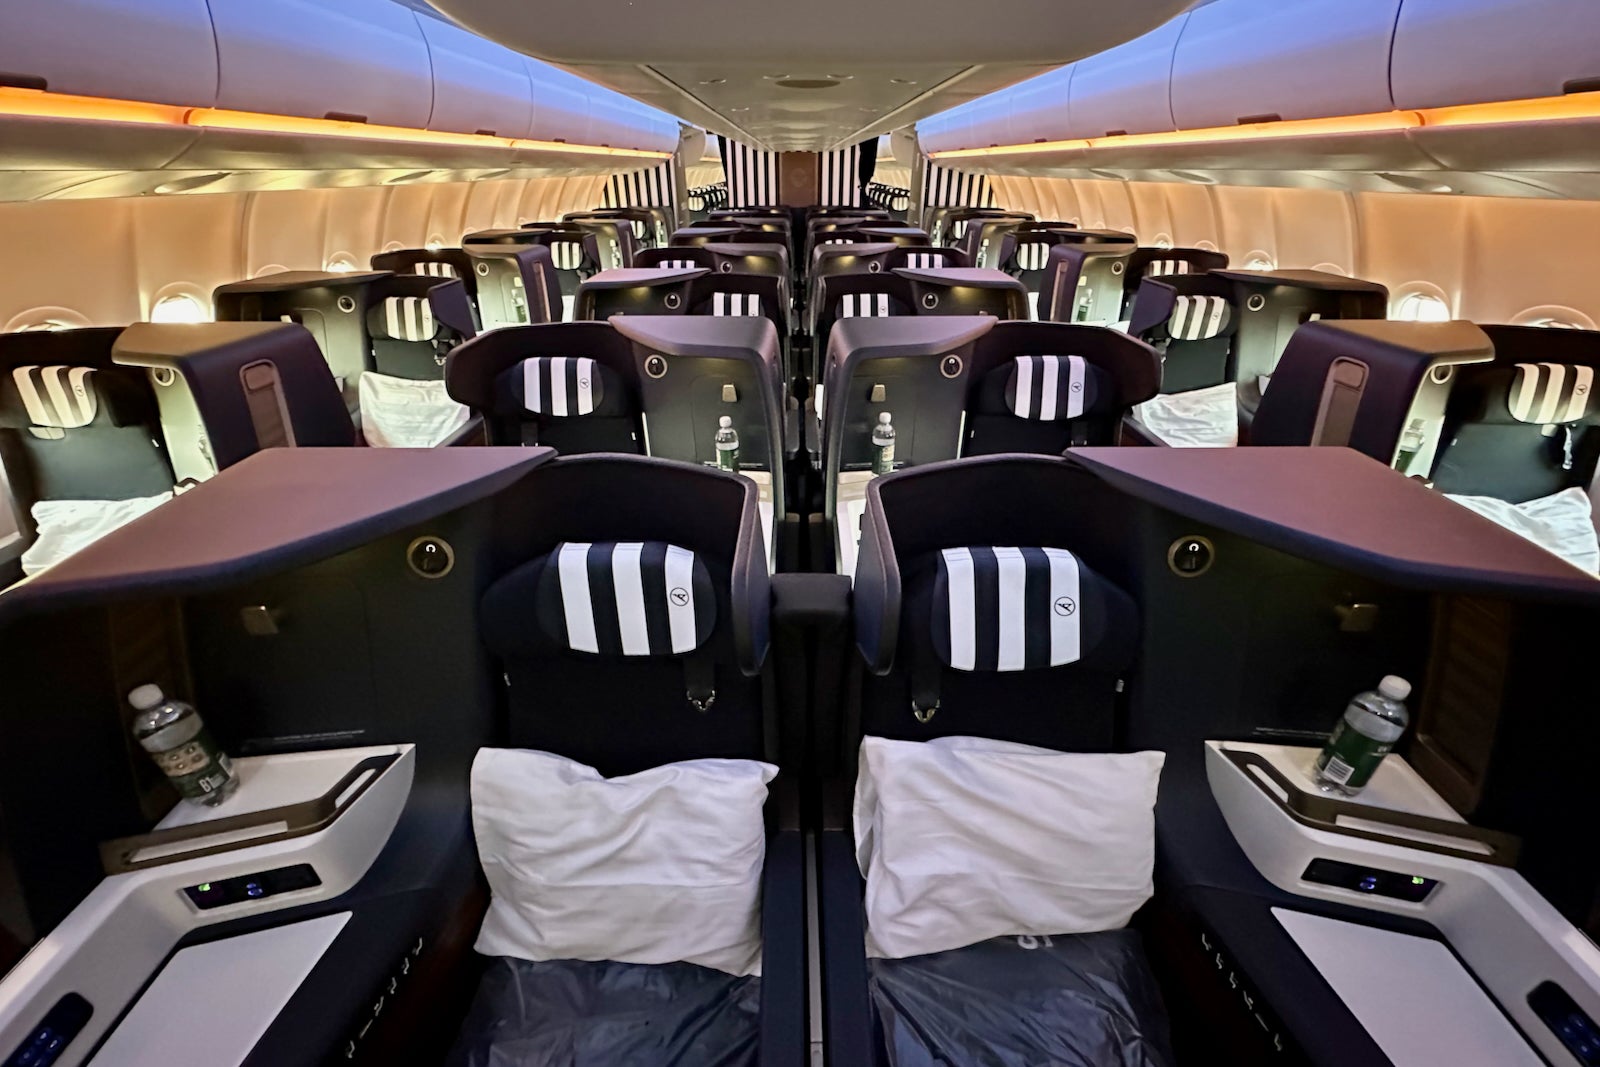 German Budget Airline Flying A330neo Business Class for $1199 One-Way;  Condor